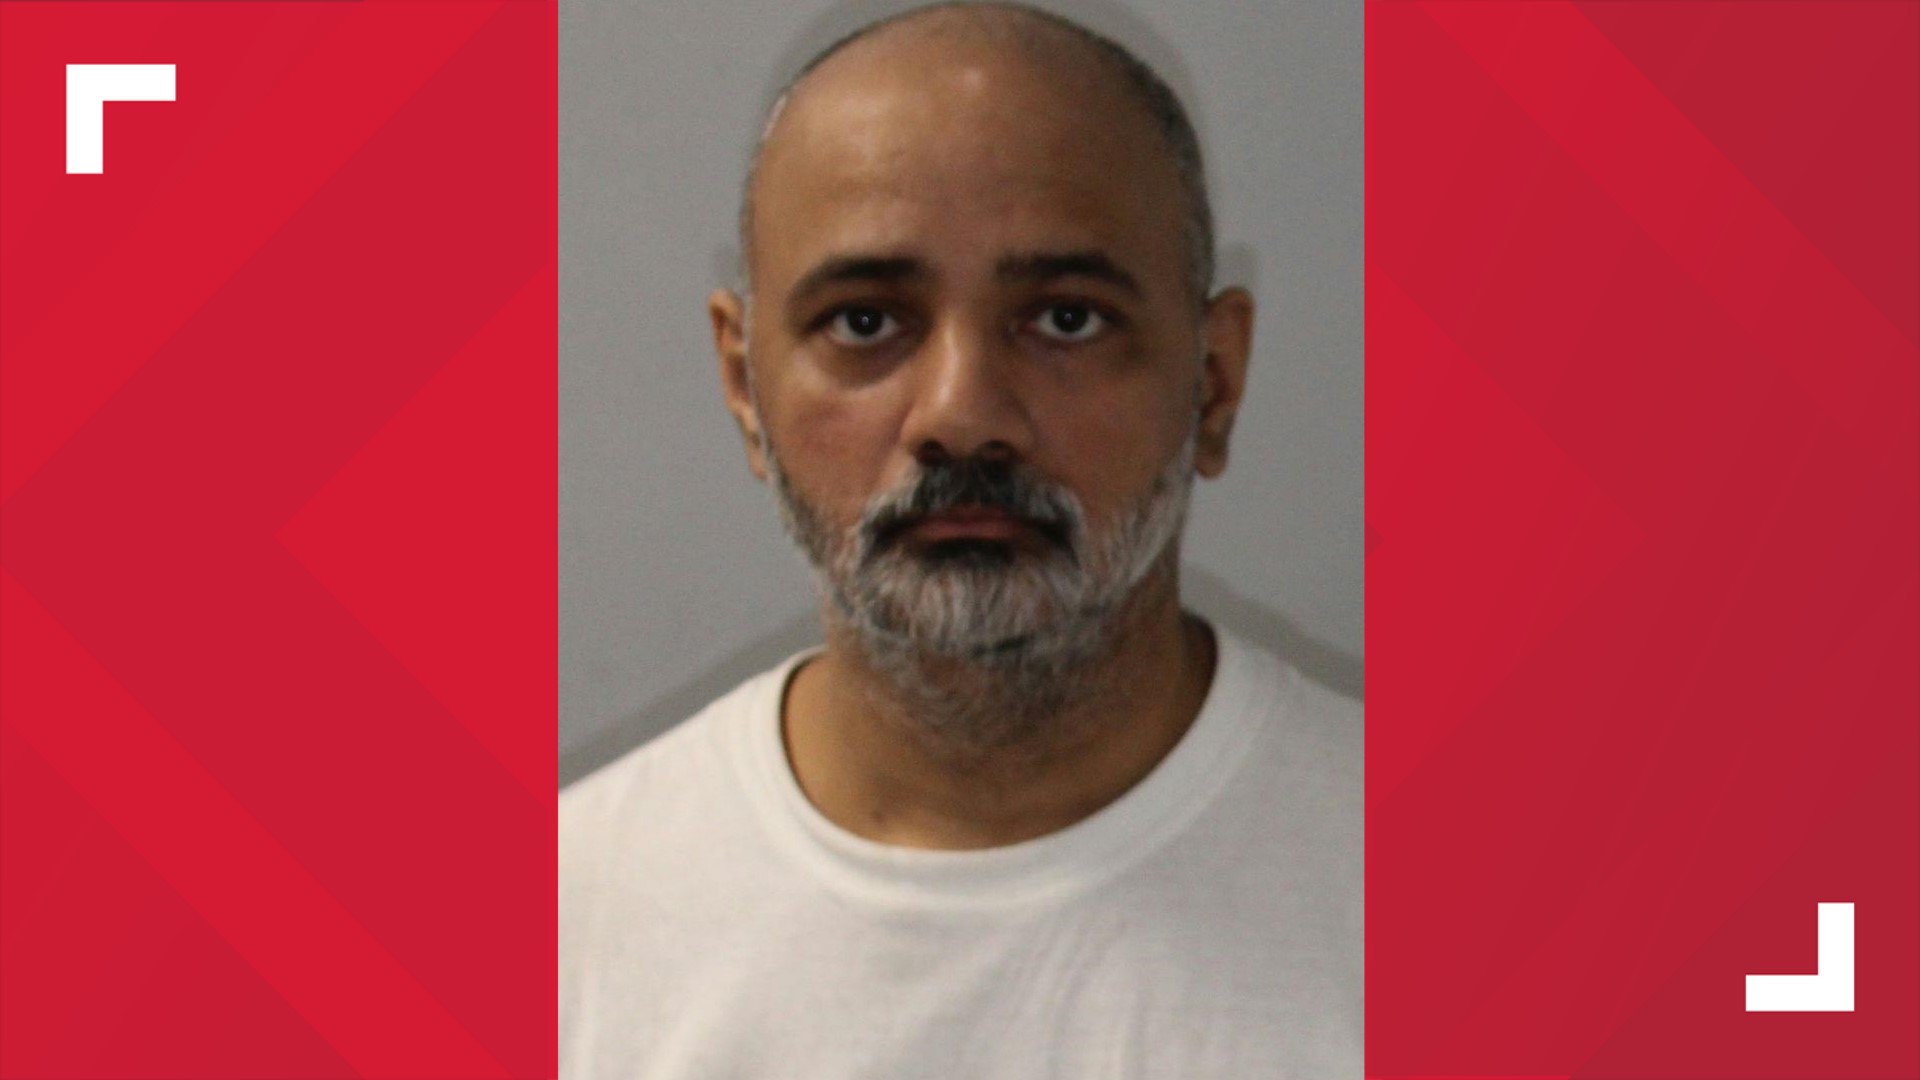 40-year-old Banmeet Singh pleaded guilty on Friday to conspiracy to distribute narcotics and conspiracy to commit money laundering as part of a plea deal.